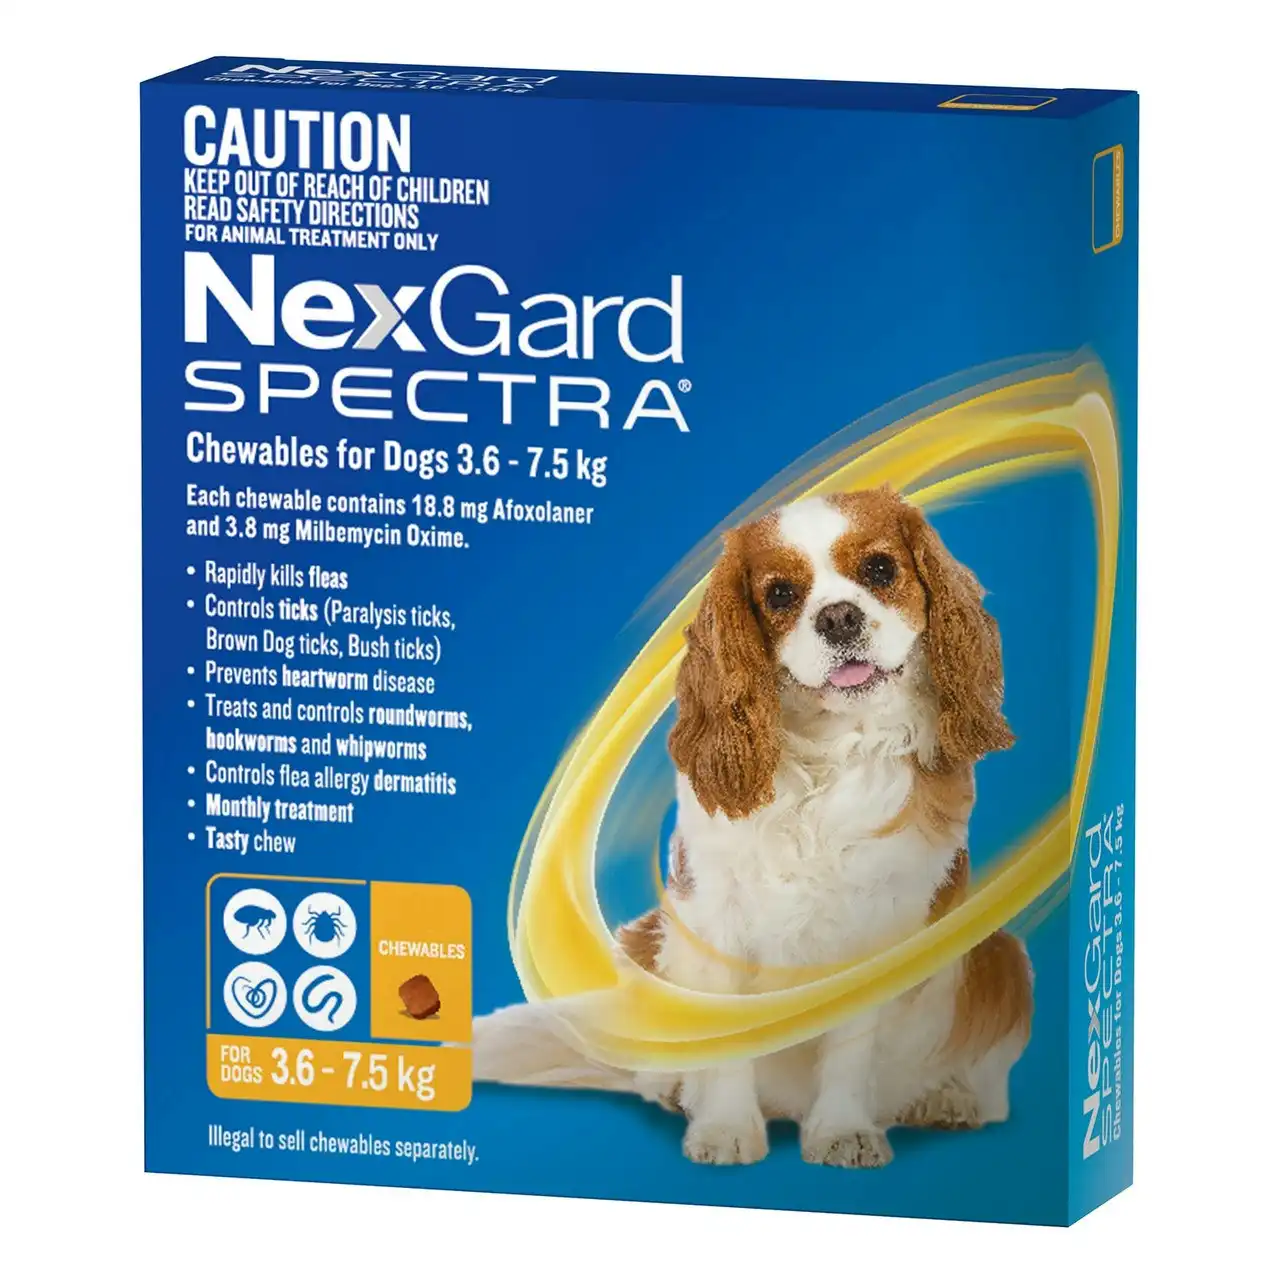 Nexgard Spectra Chewables For Dogs 3.6 - 7.5kg 3 Pack